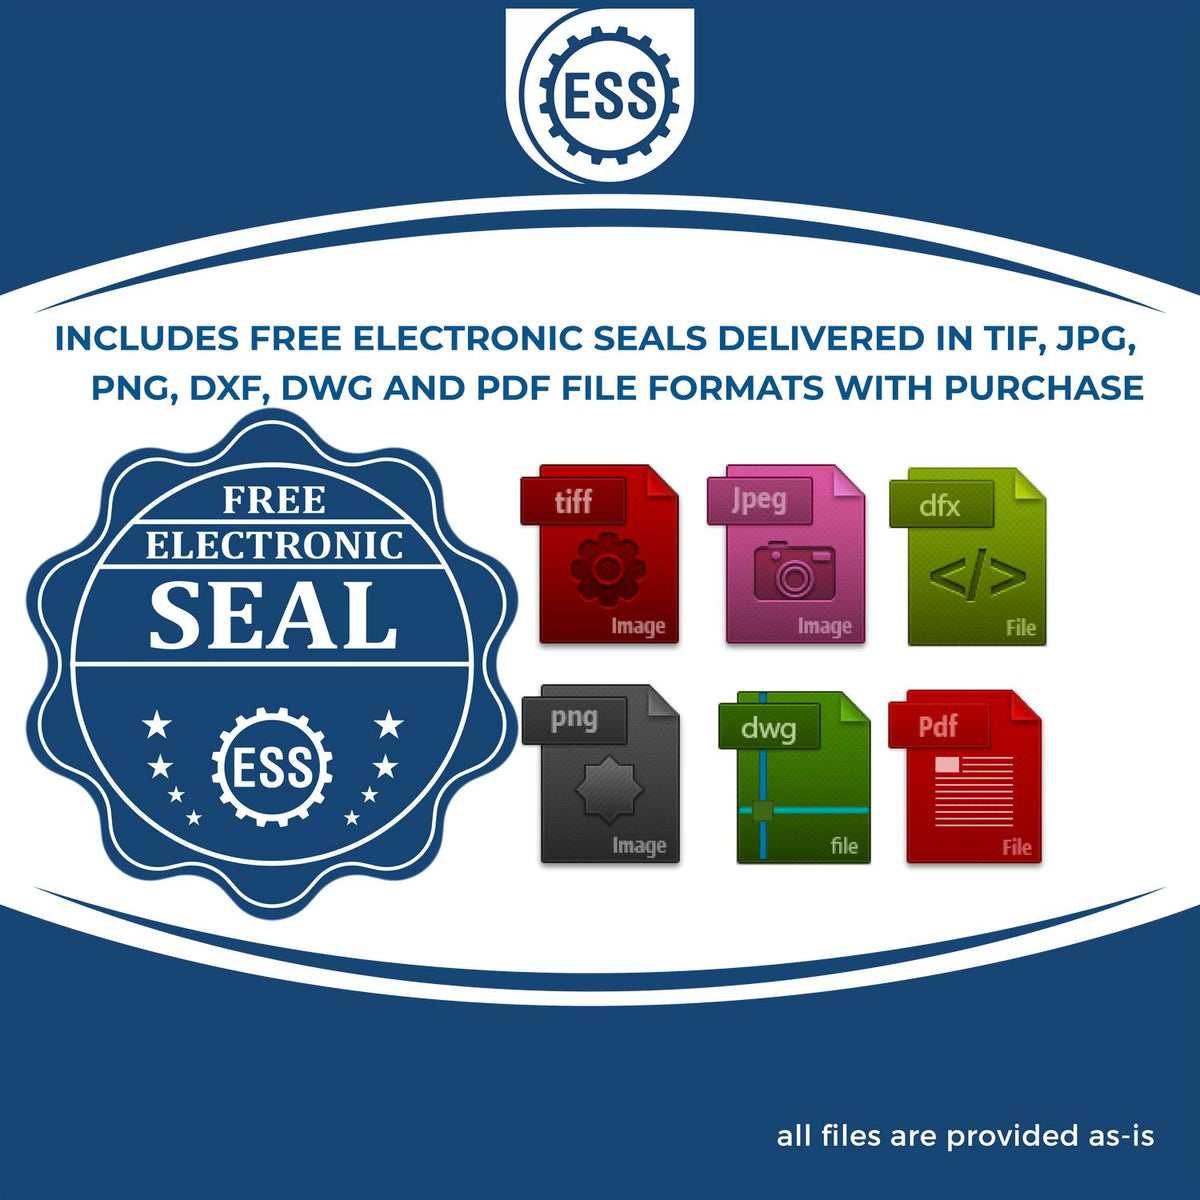 An infographic for the free electronic seal for the Hybrid Delaware Landscape Architect Seal illustrating the different file type icons such as DXF, DWG, TIF, JPG and PNG.